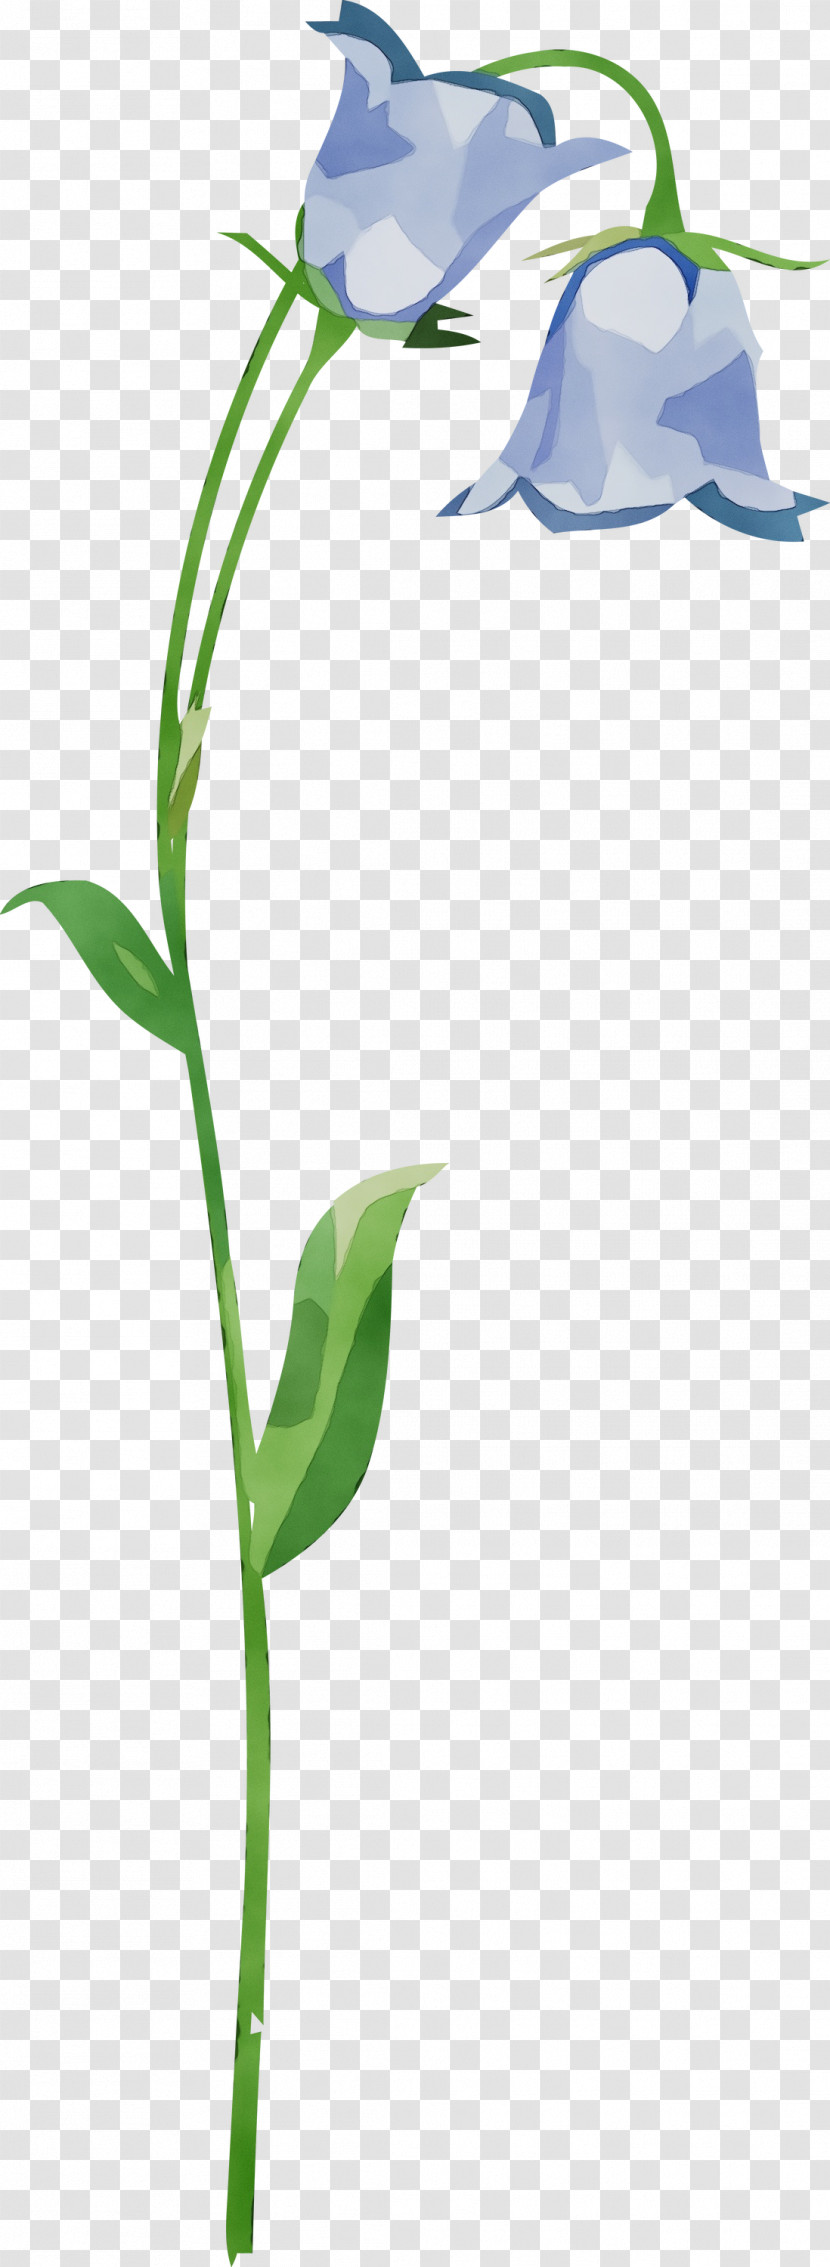 Morning Glory Flower Cut Flowers Icon Leaf Transparent PNG